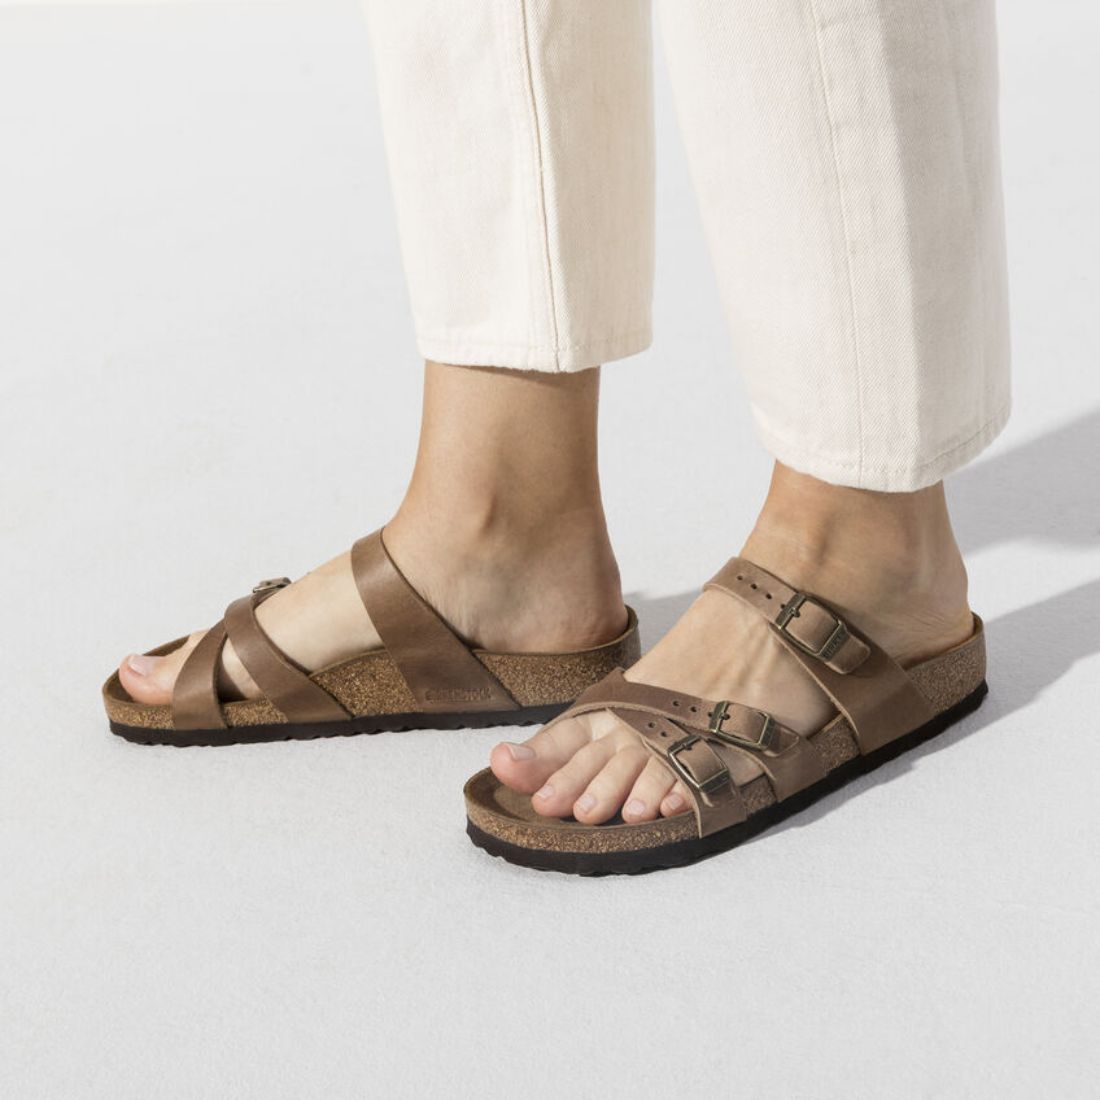 Birkenstock Franca Leather in Tobacco | Cotton Island Women's Clothing Boutique